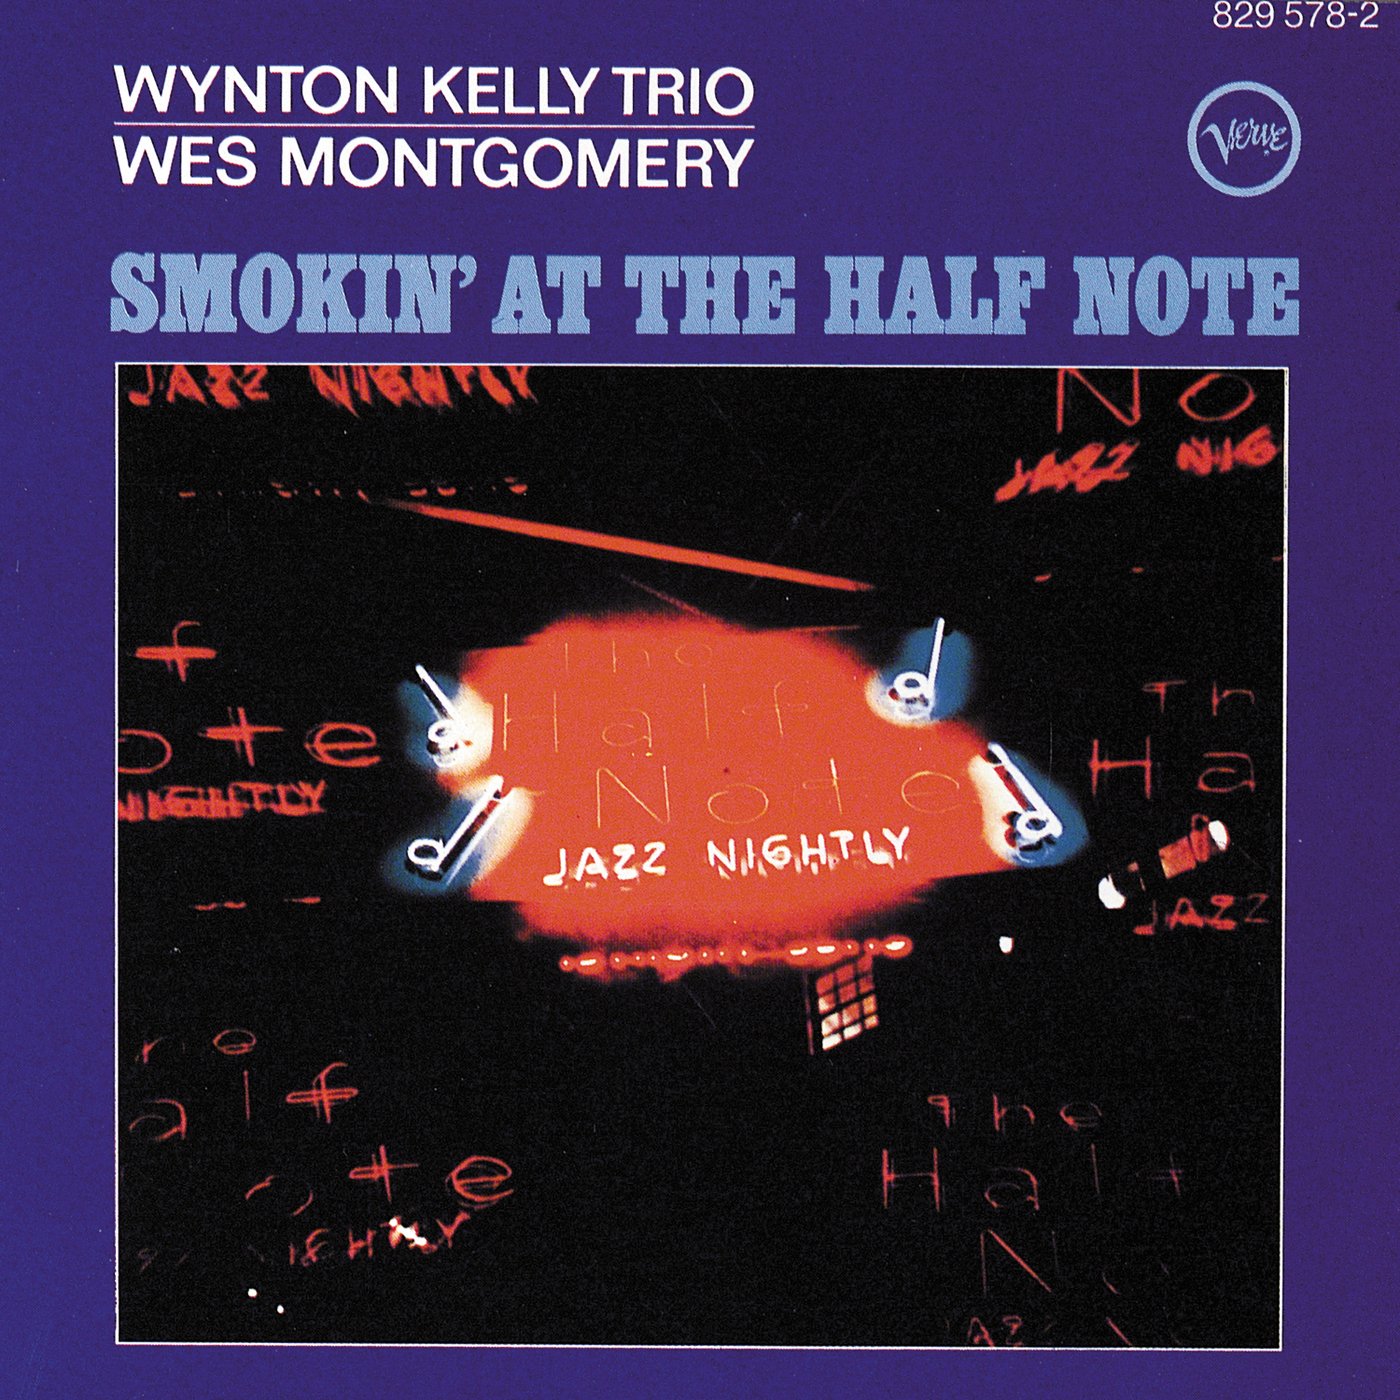 Wes Montgomery, Smokin’ at the Half Note, CD